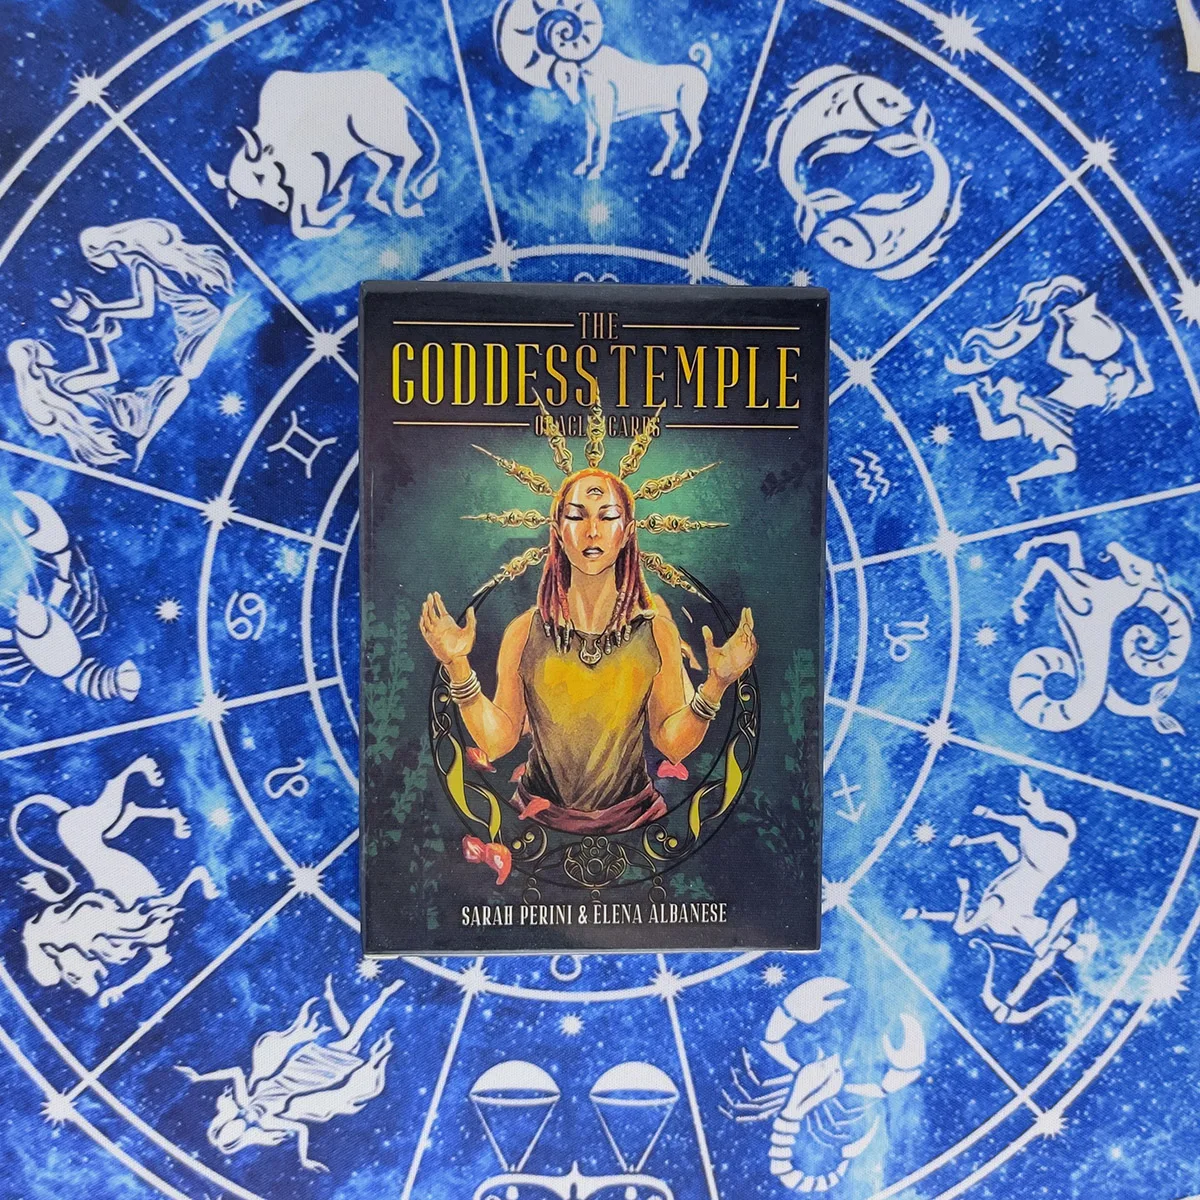 Trend The Goddess Temple Oracle Card Tarot Cards and PDF Guidebook Divination Card Toys Entertainment Board Games 45Pcs lavonne braaten the living temple